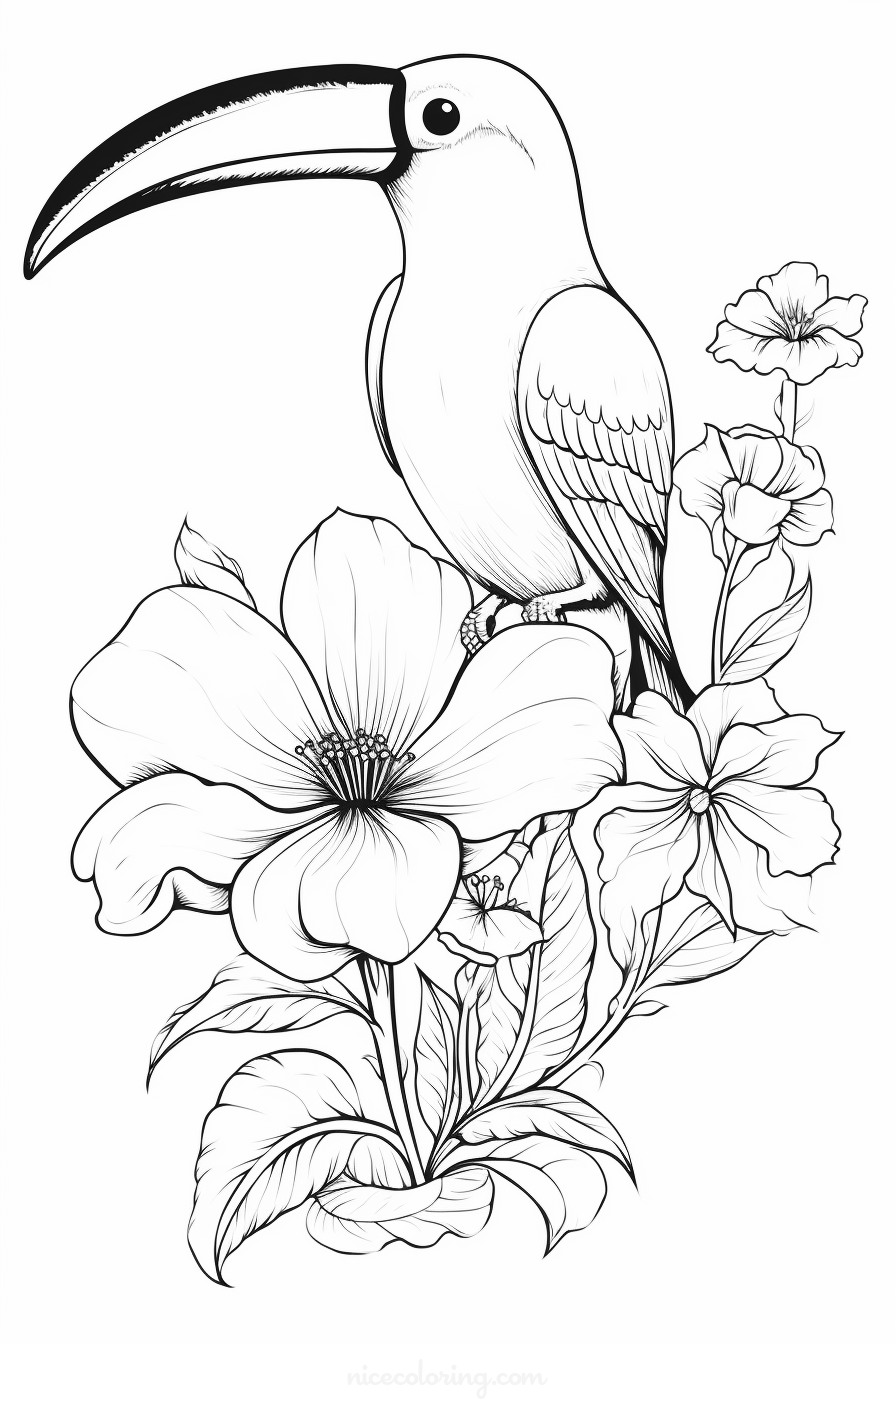 Eagle soaring in the sky coloring page